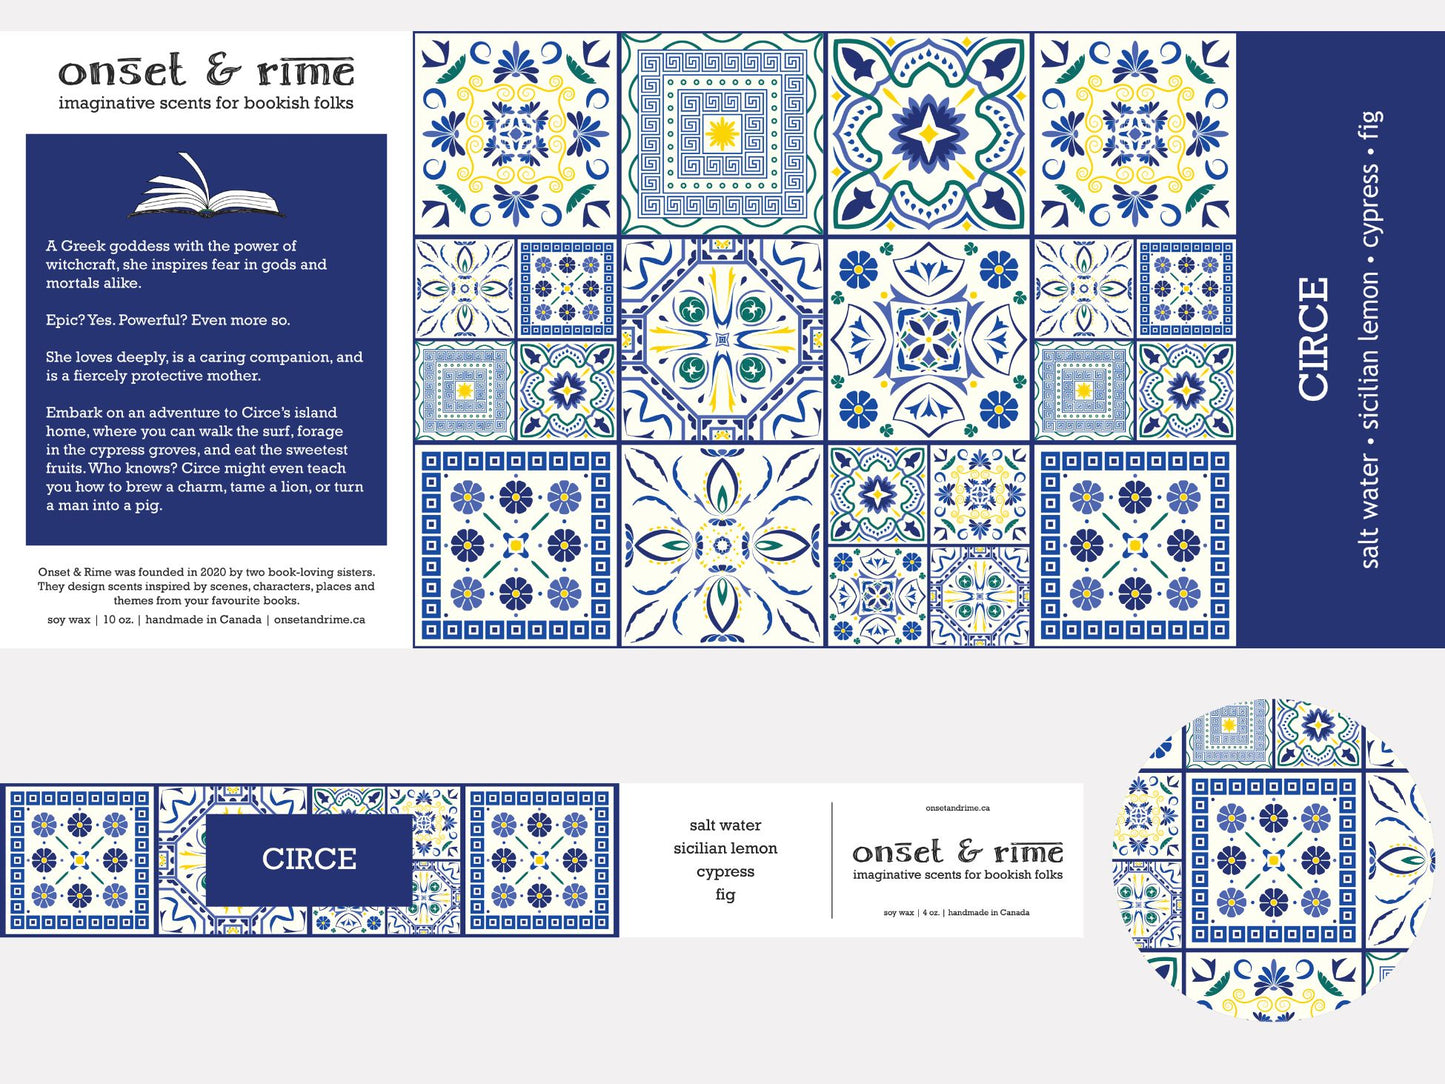 A close up view of the label for the Onset & Rime lemon, cypress scented candle called "Circe". The label is white with a dark blue Greek tile pattern. The text on the label is "Circe - Salt Water, Sicilian Lemon, Cypress, Fig".